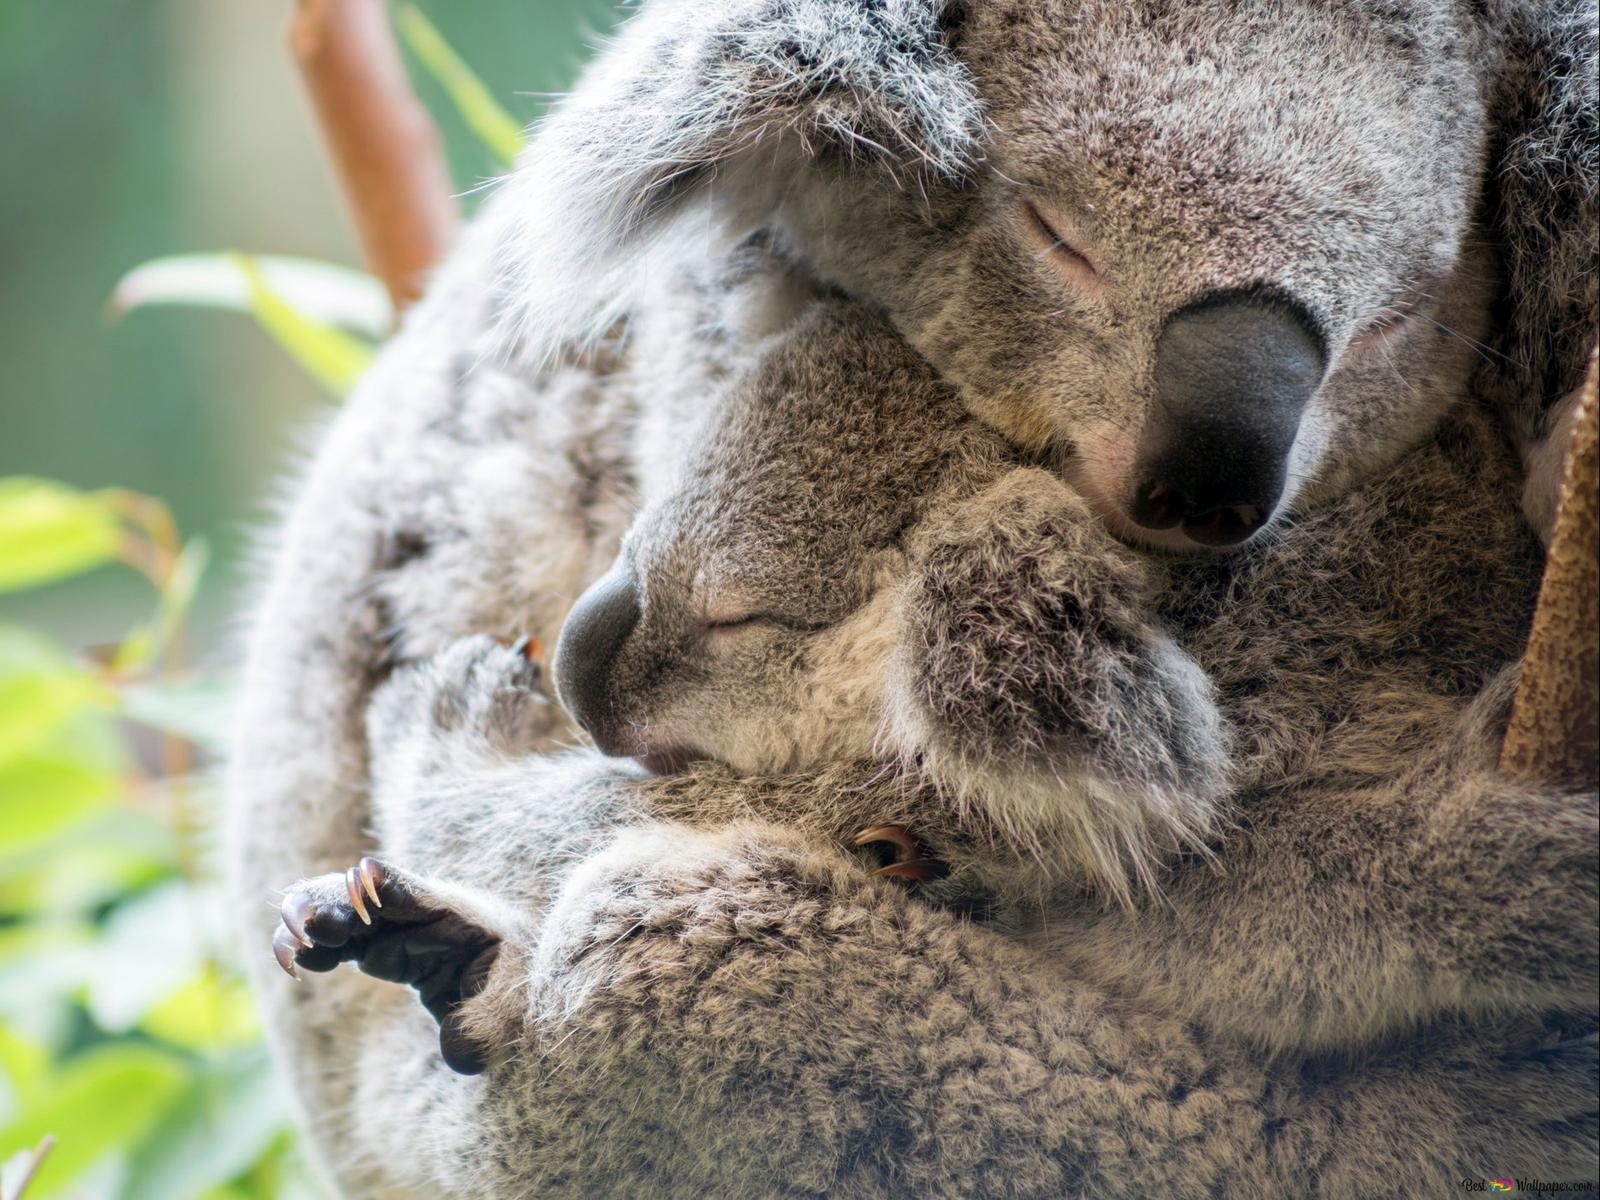 Mother and baby koala sleeping on tree in front of green out